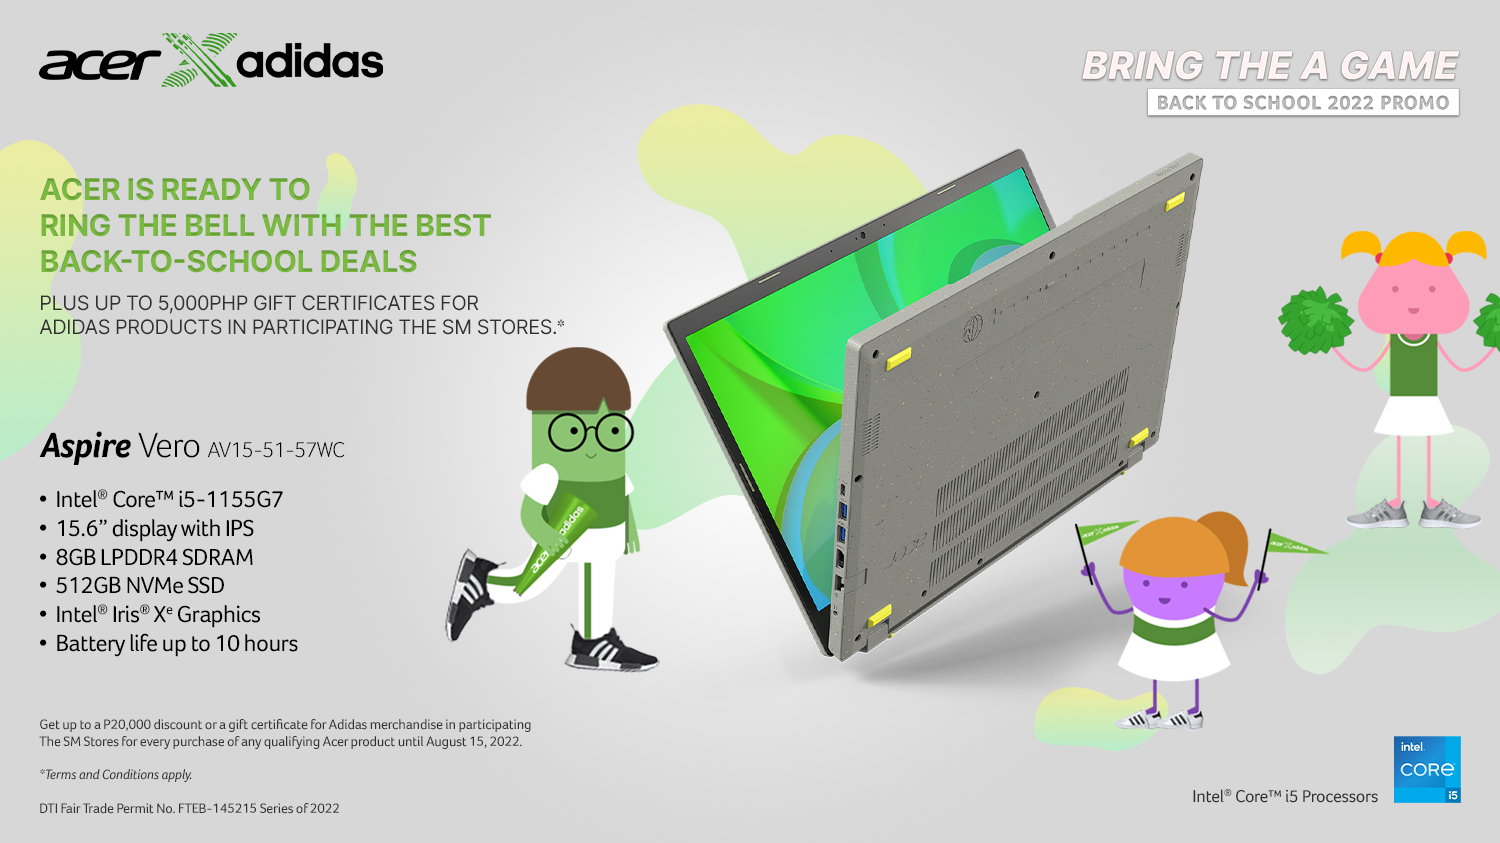 Acer is ready to ring the bell with the best back-to-school deals plus up to 5,000php gift certificates for Adidas products in participating The SM Stores. 